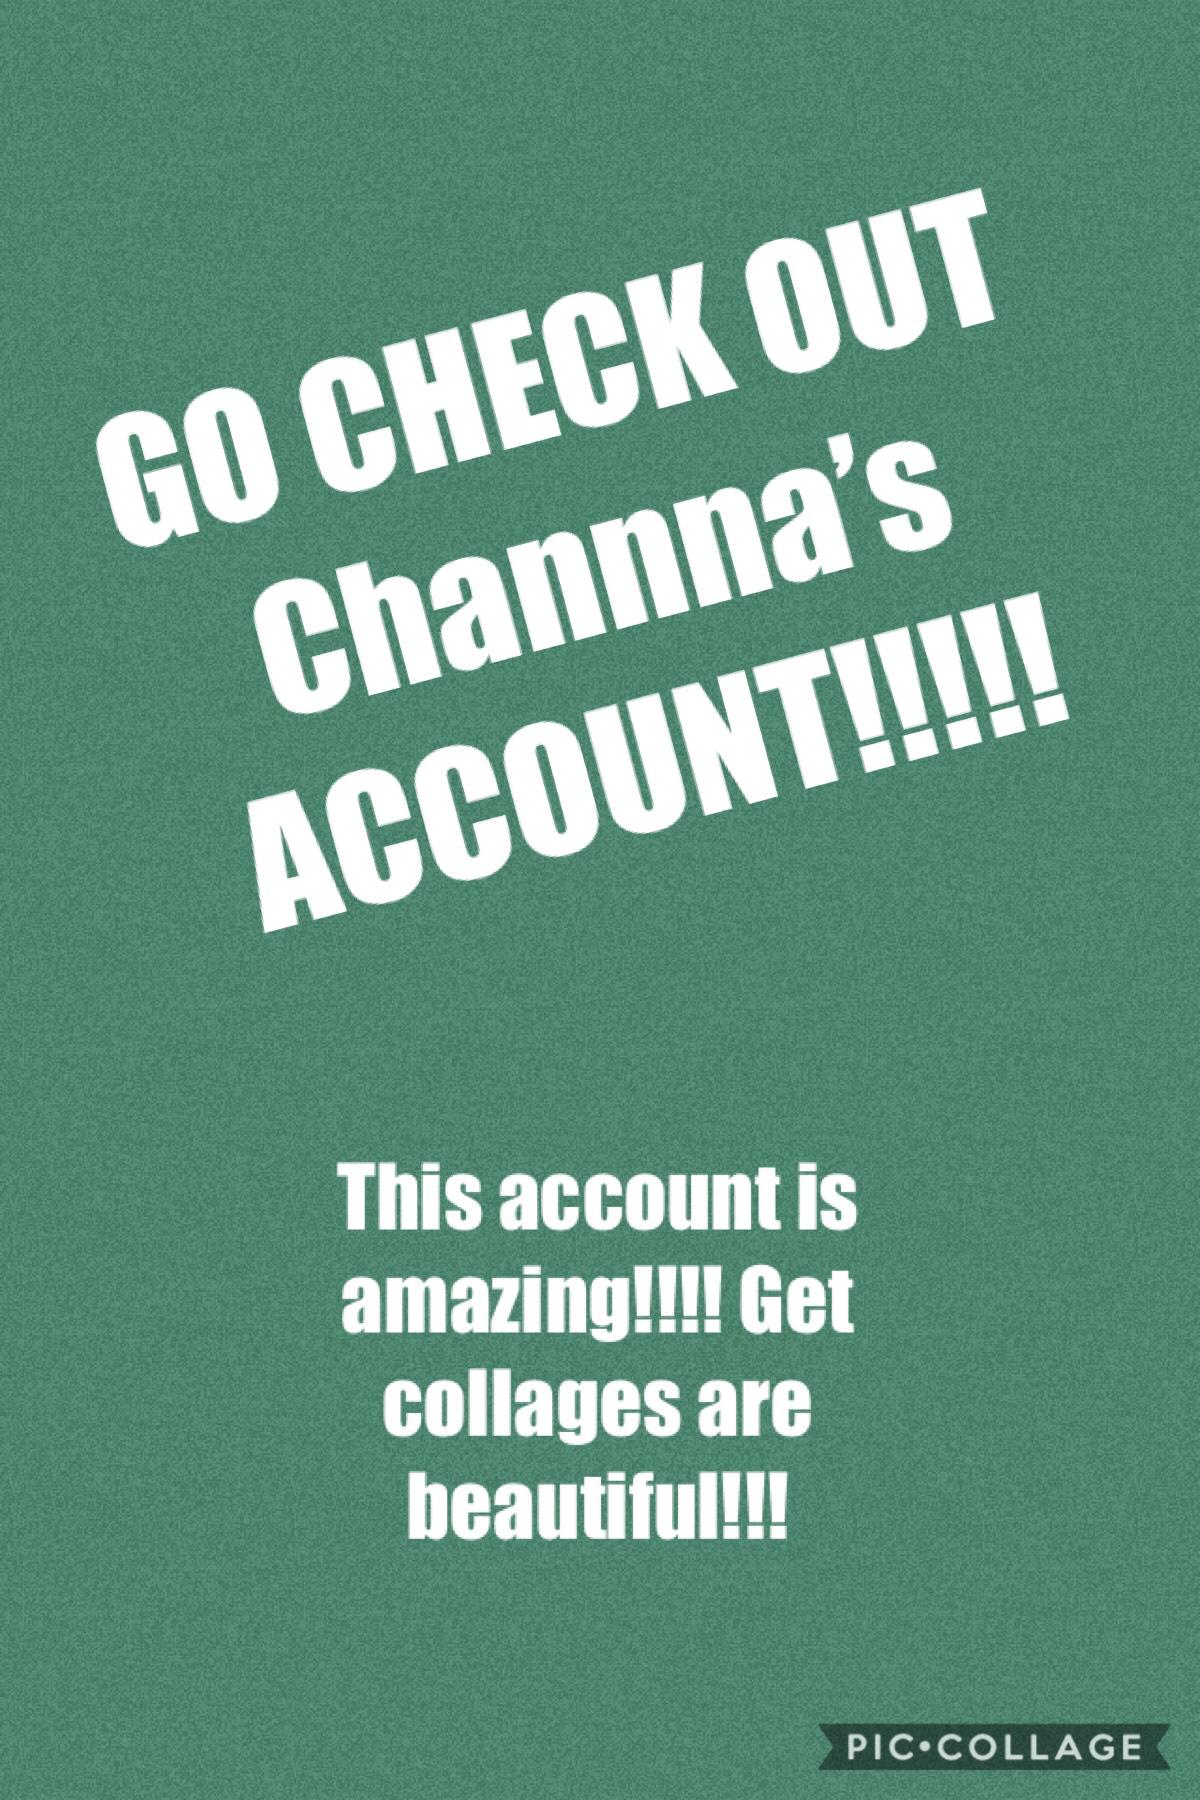 Go check out Channna’s account!! 